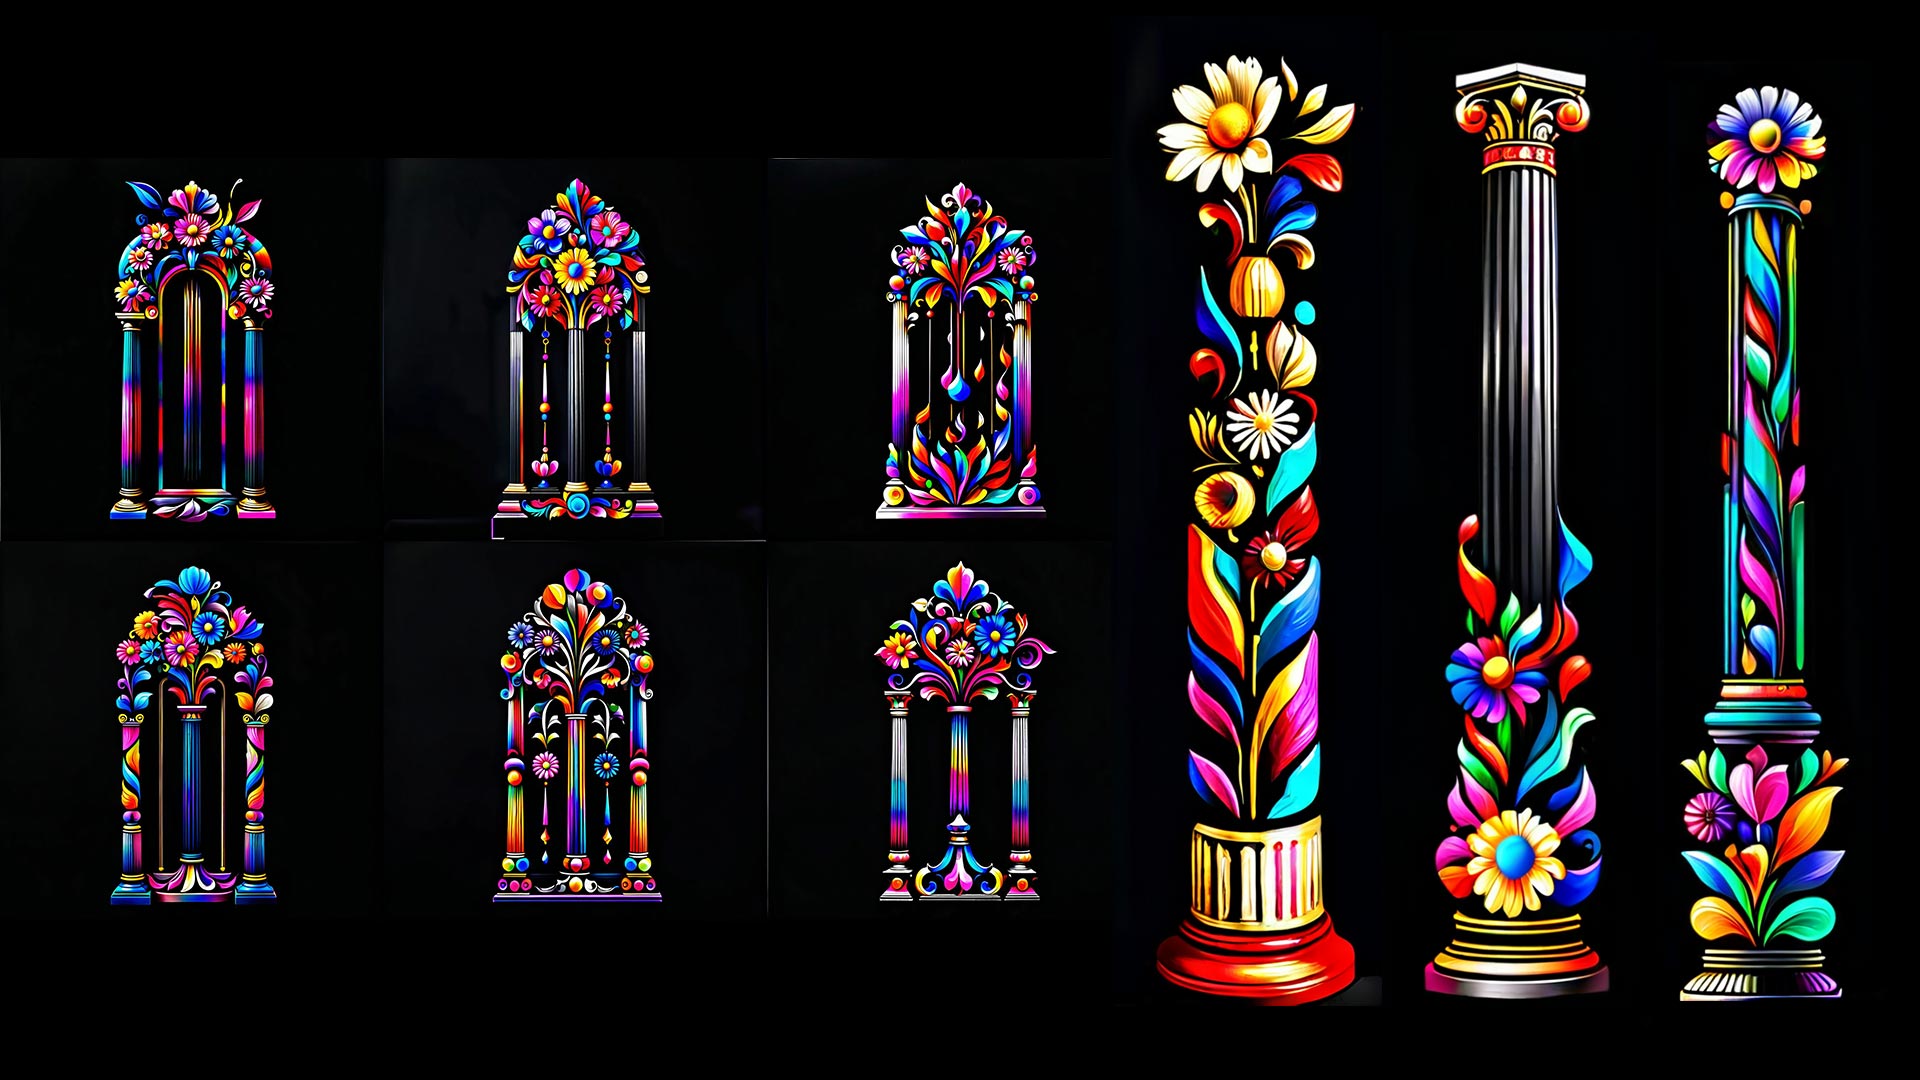 Flourish Vintage Flower architectural facade decorative elements projection mapping